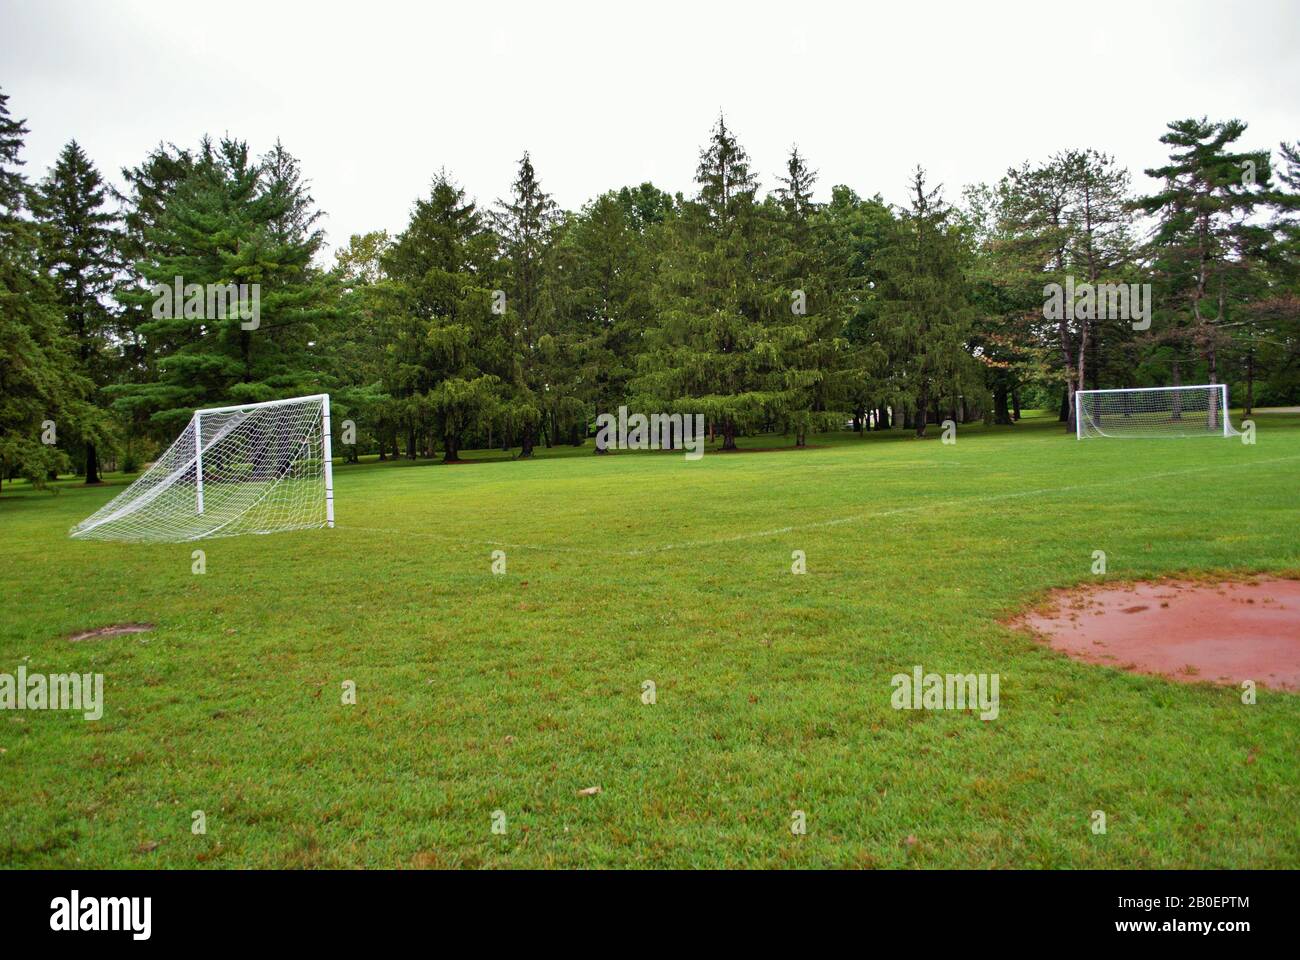 empty soccer field football pitch in a park Stock Photo